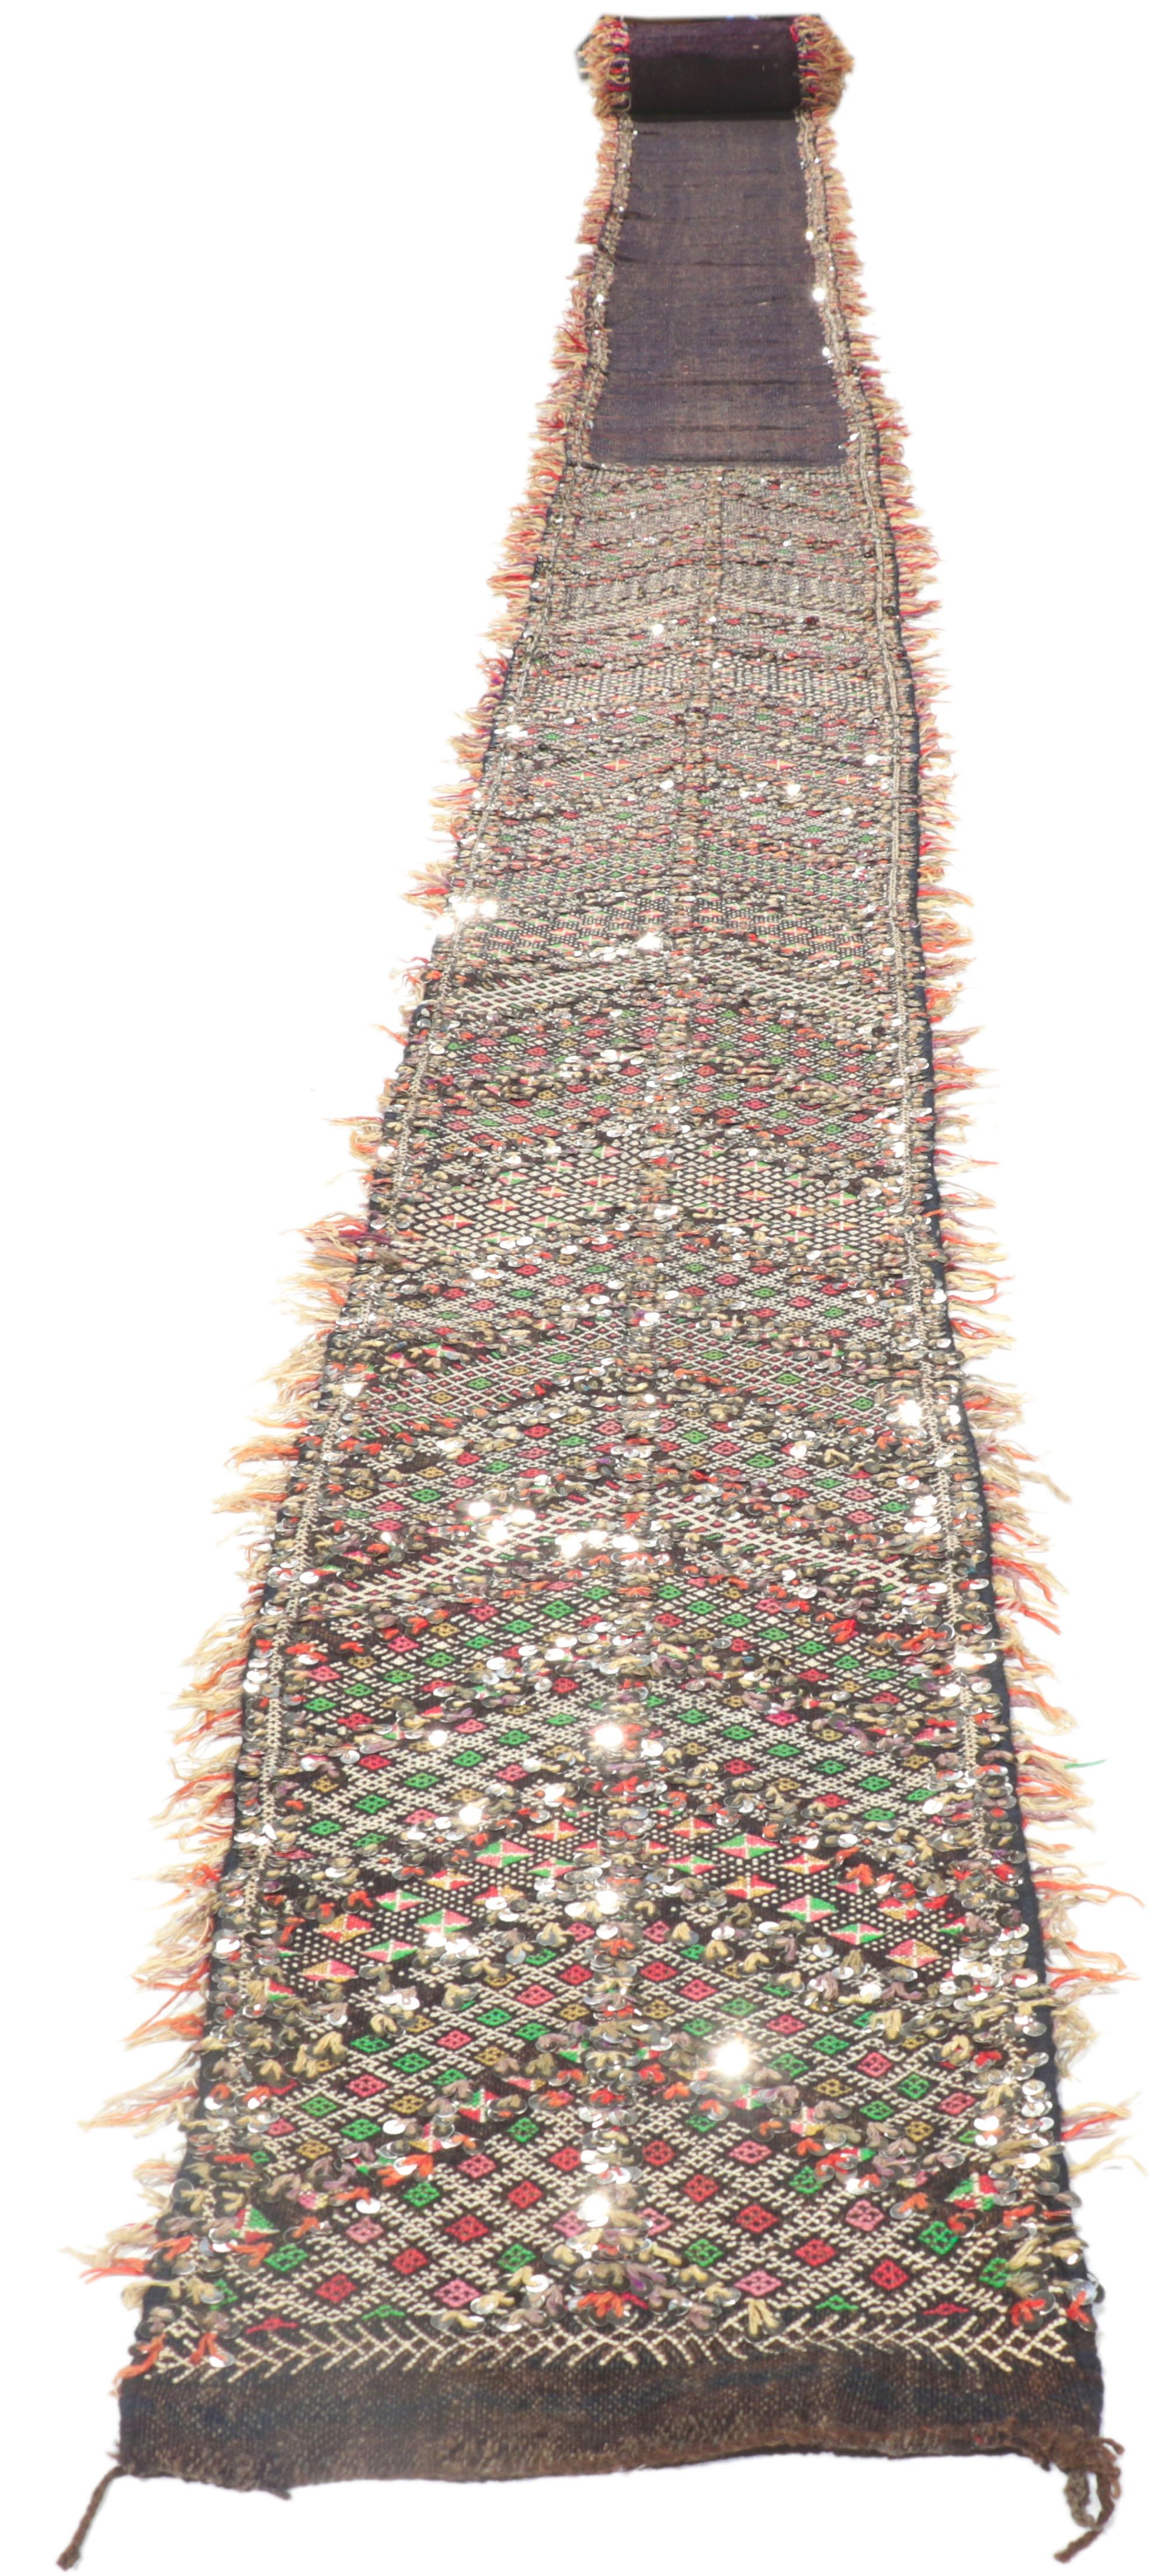 21193 Vintage Moroccan Sequined Kilim Rug - Wedding Aisle Runner. Full of tiny details and embellished with sequins combined with boho chic tribal style, this hand-woven wool vintage Berber Moroccan kilim rug is a captivating vision of woven beauty.